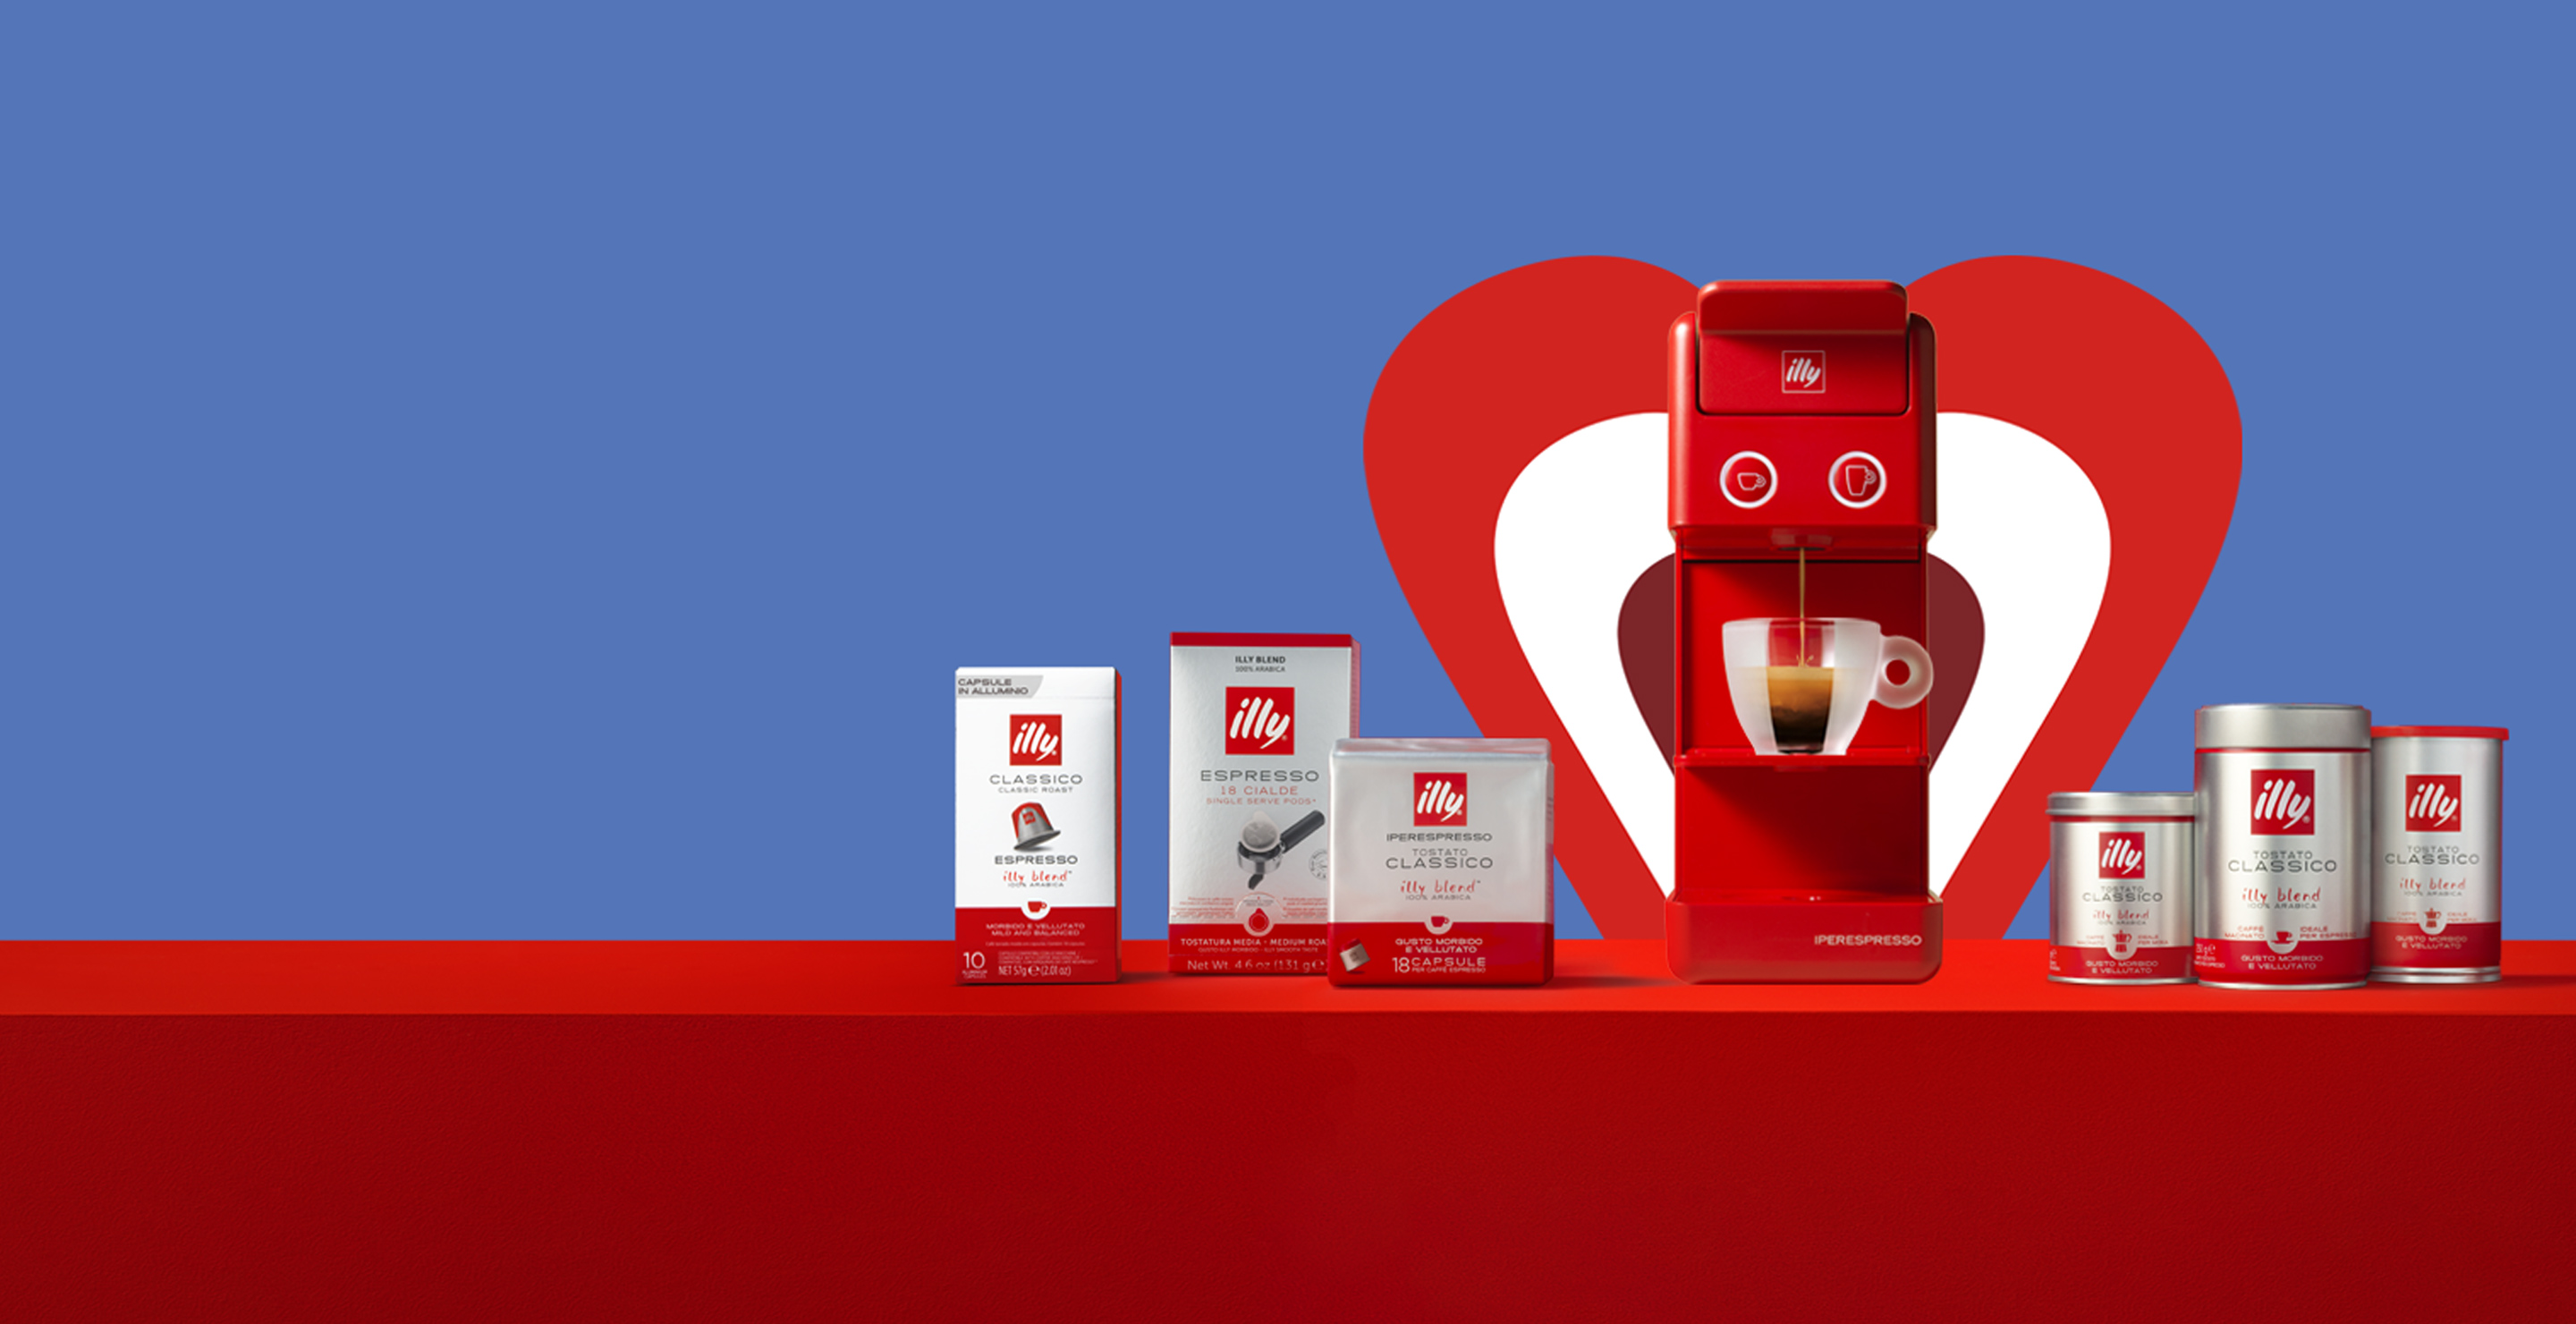  illy Lovers - Y3 Iperespresso